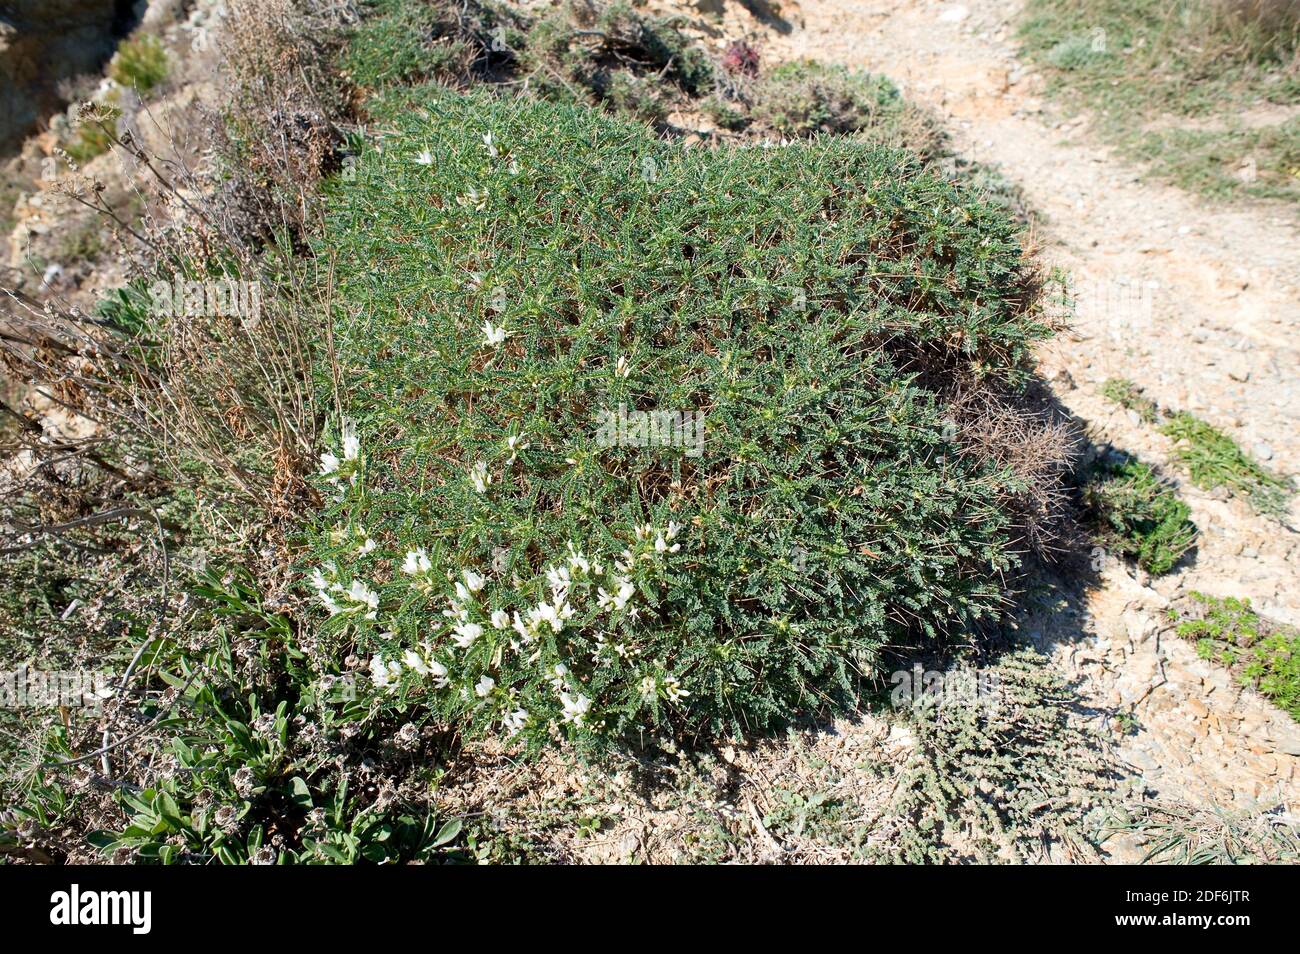 Coixinet de monja (Astragalus massiliensis or Astragalus tragacantha) is a cushion-like spiny shrub native to Mediterranean Basin (Catalonia, France, Stock Photo